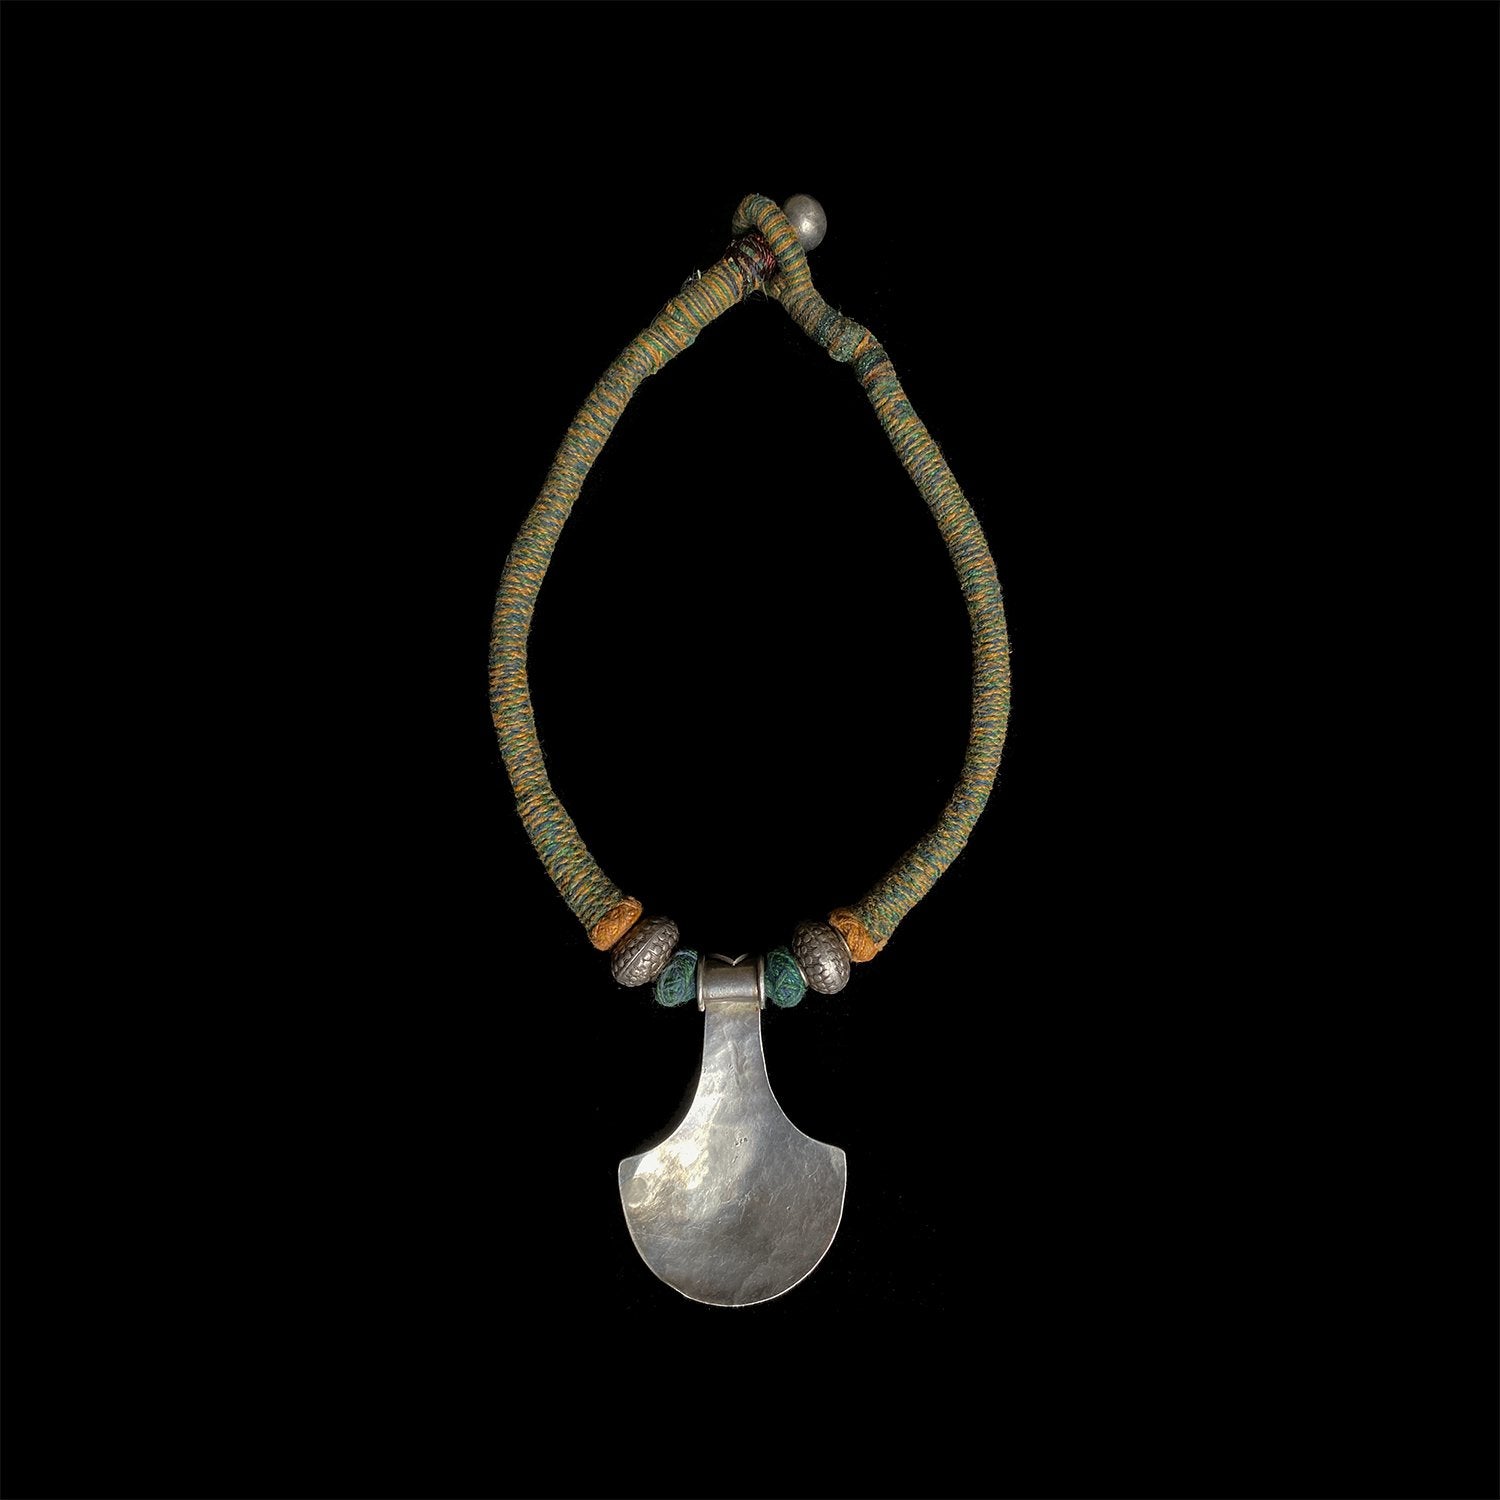 Silver pendant necklace from Jaipur